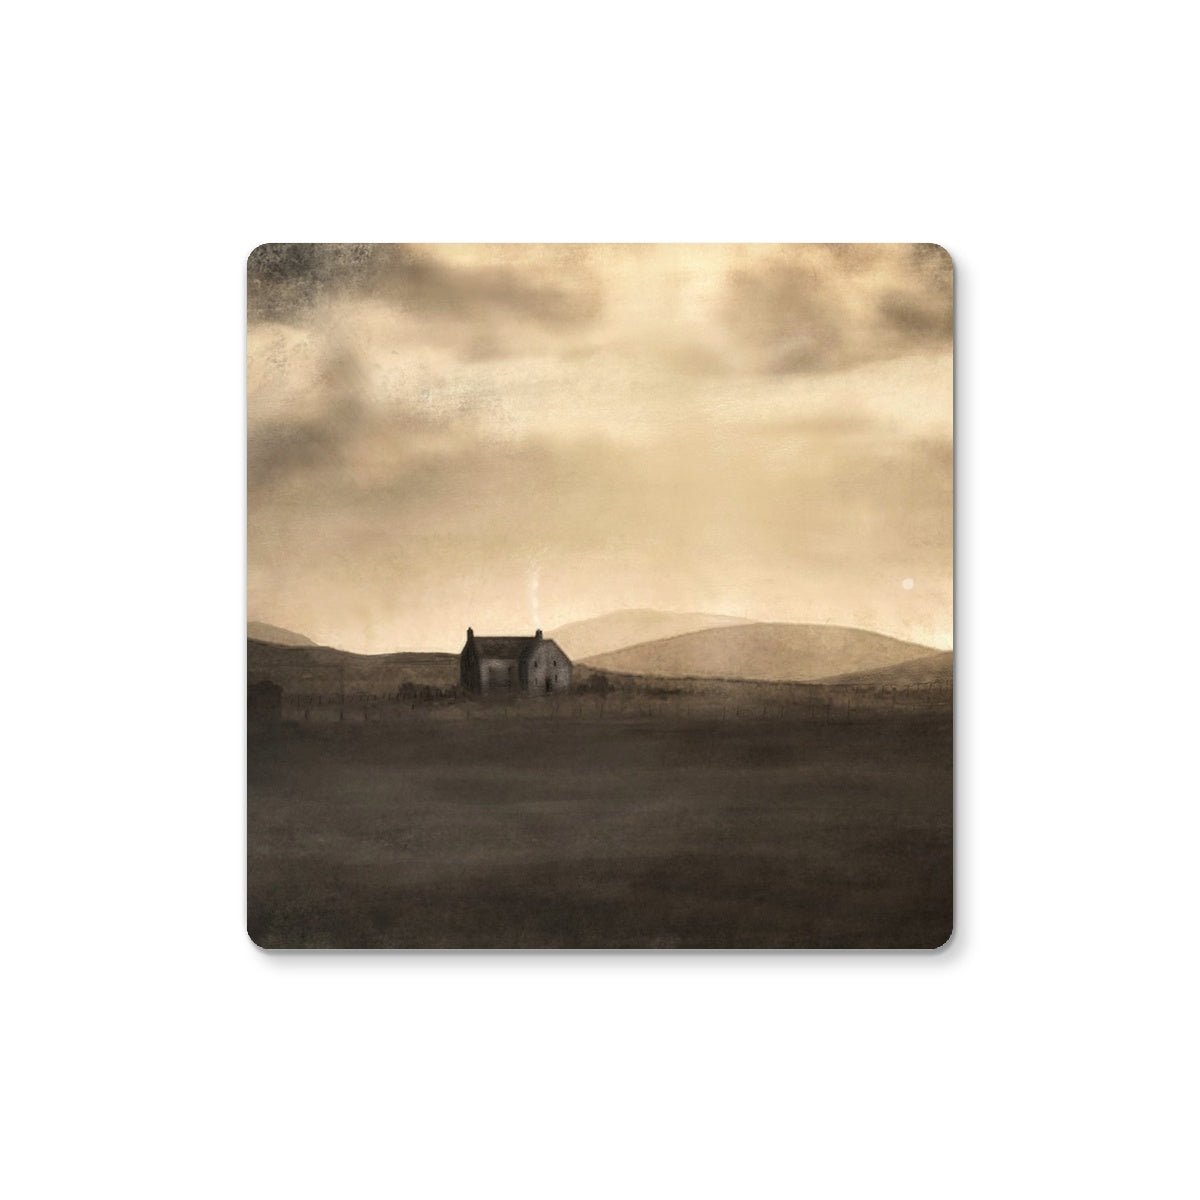 A Moonlit Croft Art Gifts Coaster-Coasters-Hebridean Islands Art Gallery-2 Coasters-Paintings, Prints, Homeware, Art Gifts From Scotland By Scottish Artist Kevin Hunter